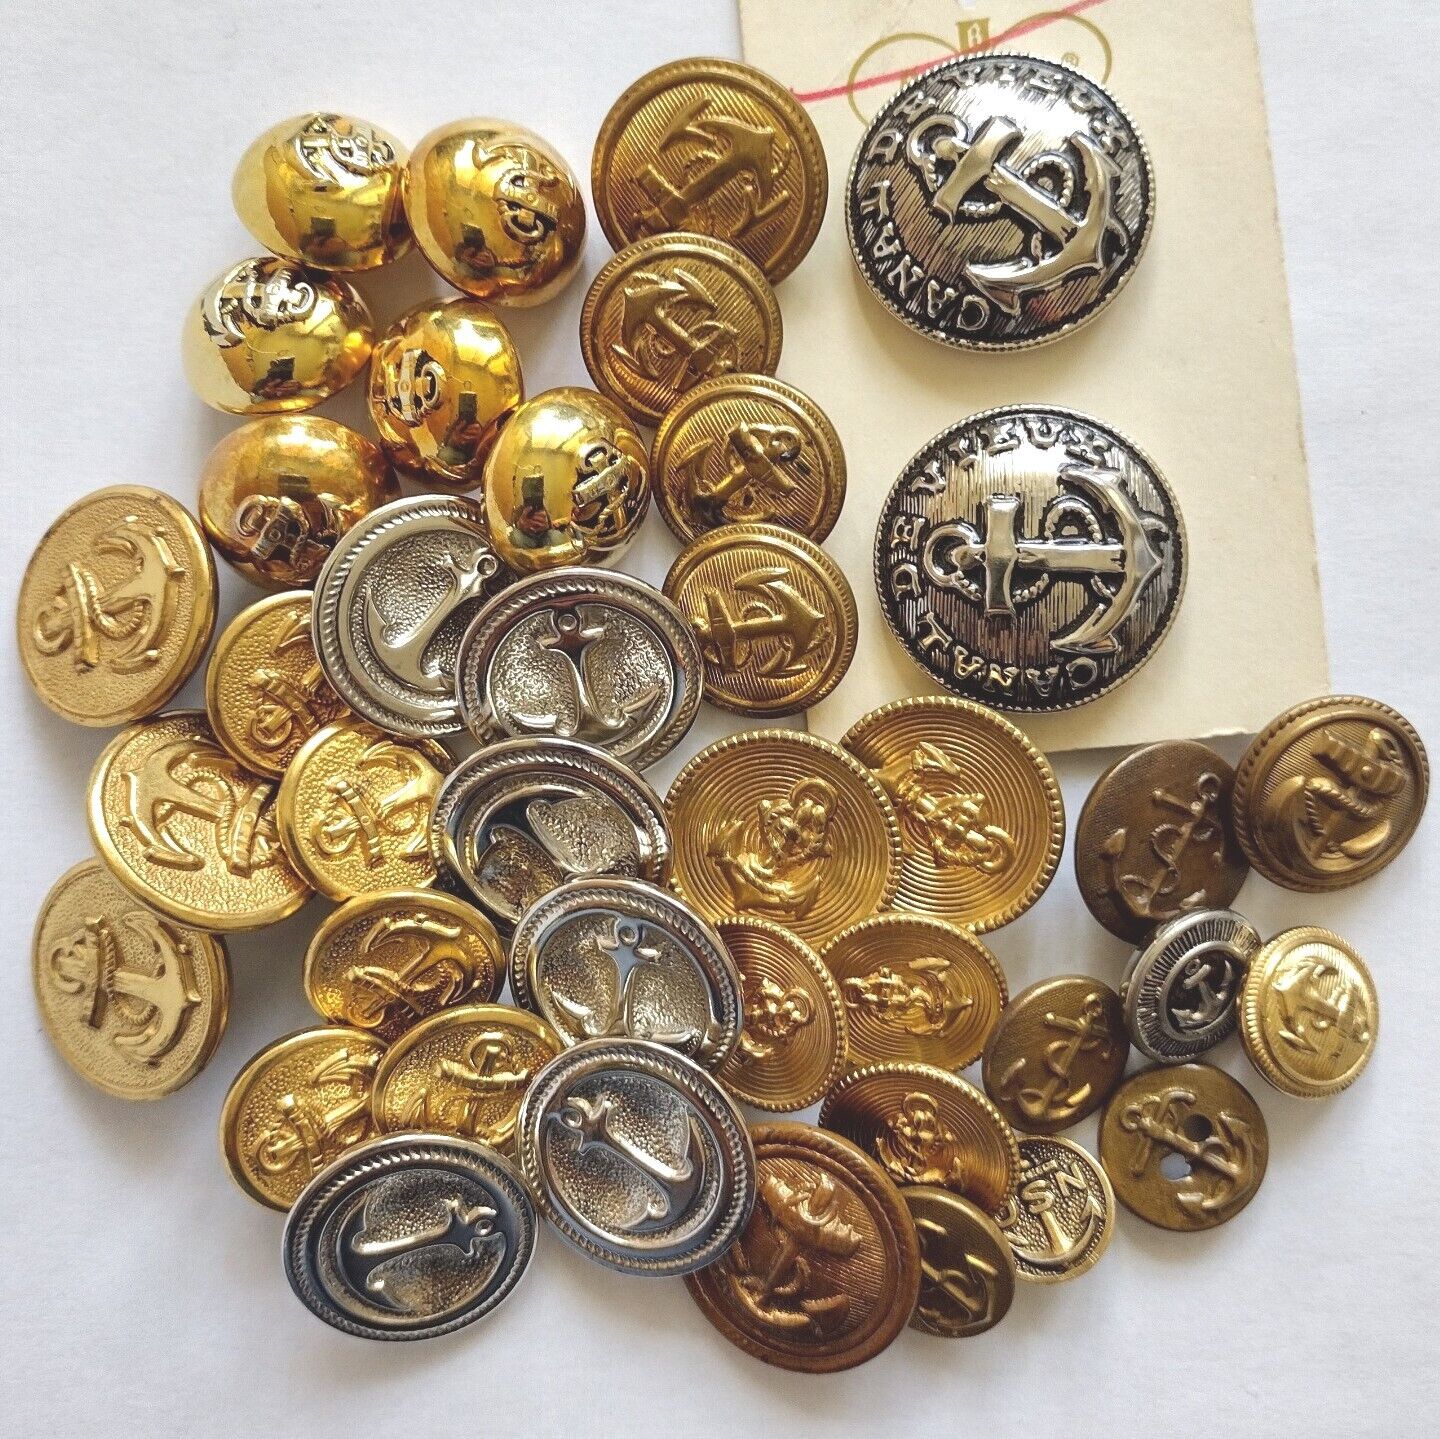 Lot of 40 Vtg Metal Anchor Nautical Theme Buttons for Crafting or Repurposing